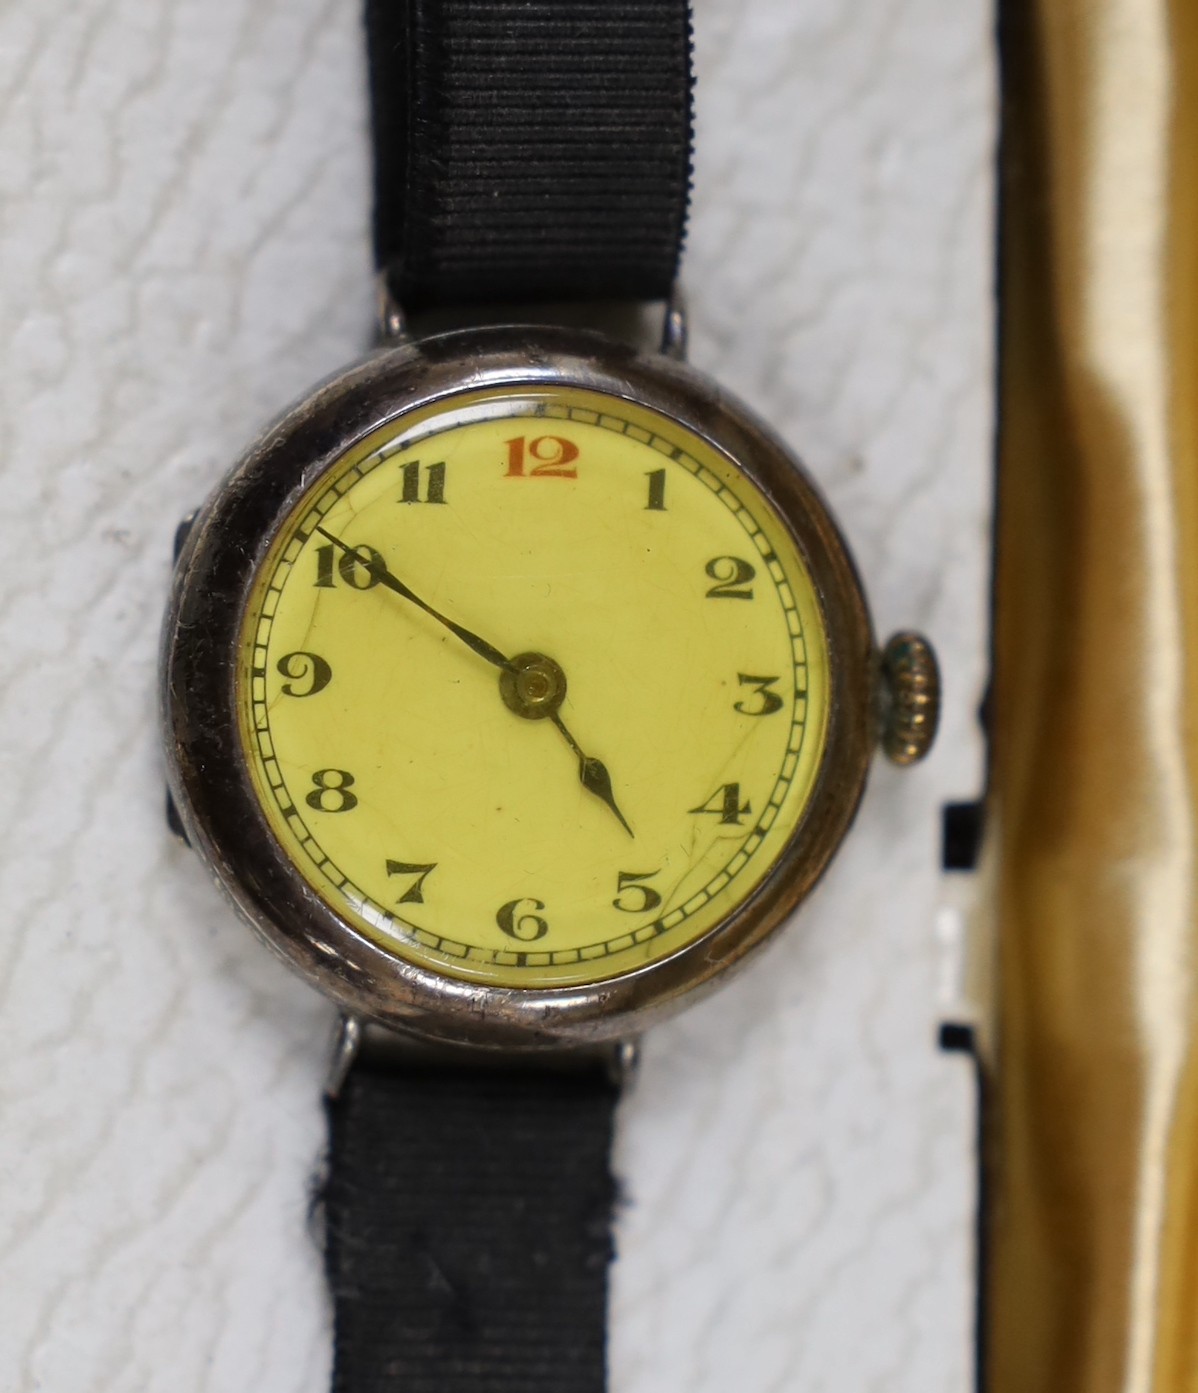 Three assorted wrist watches, including yellow metal and steel cased.